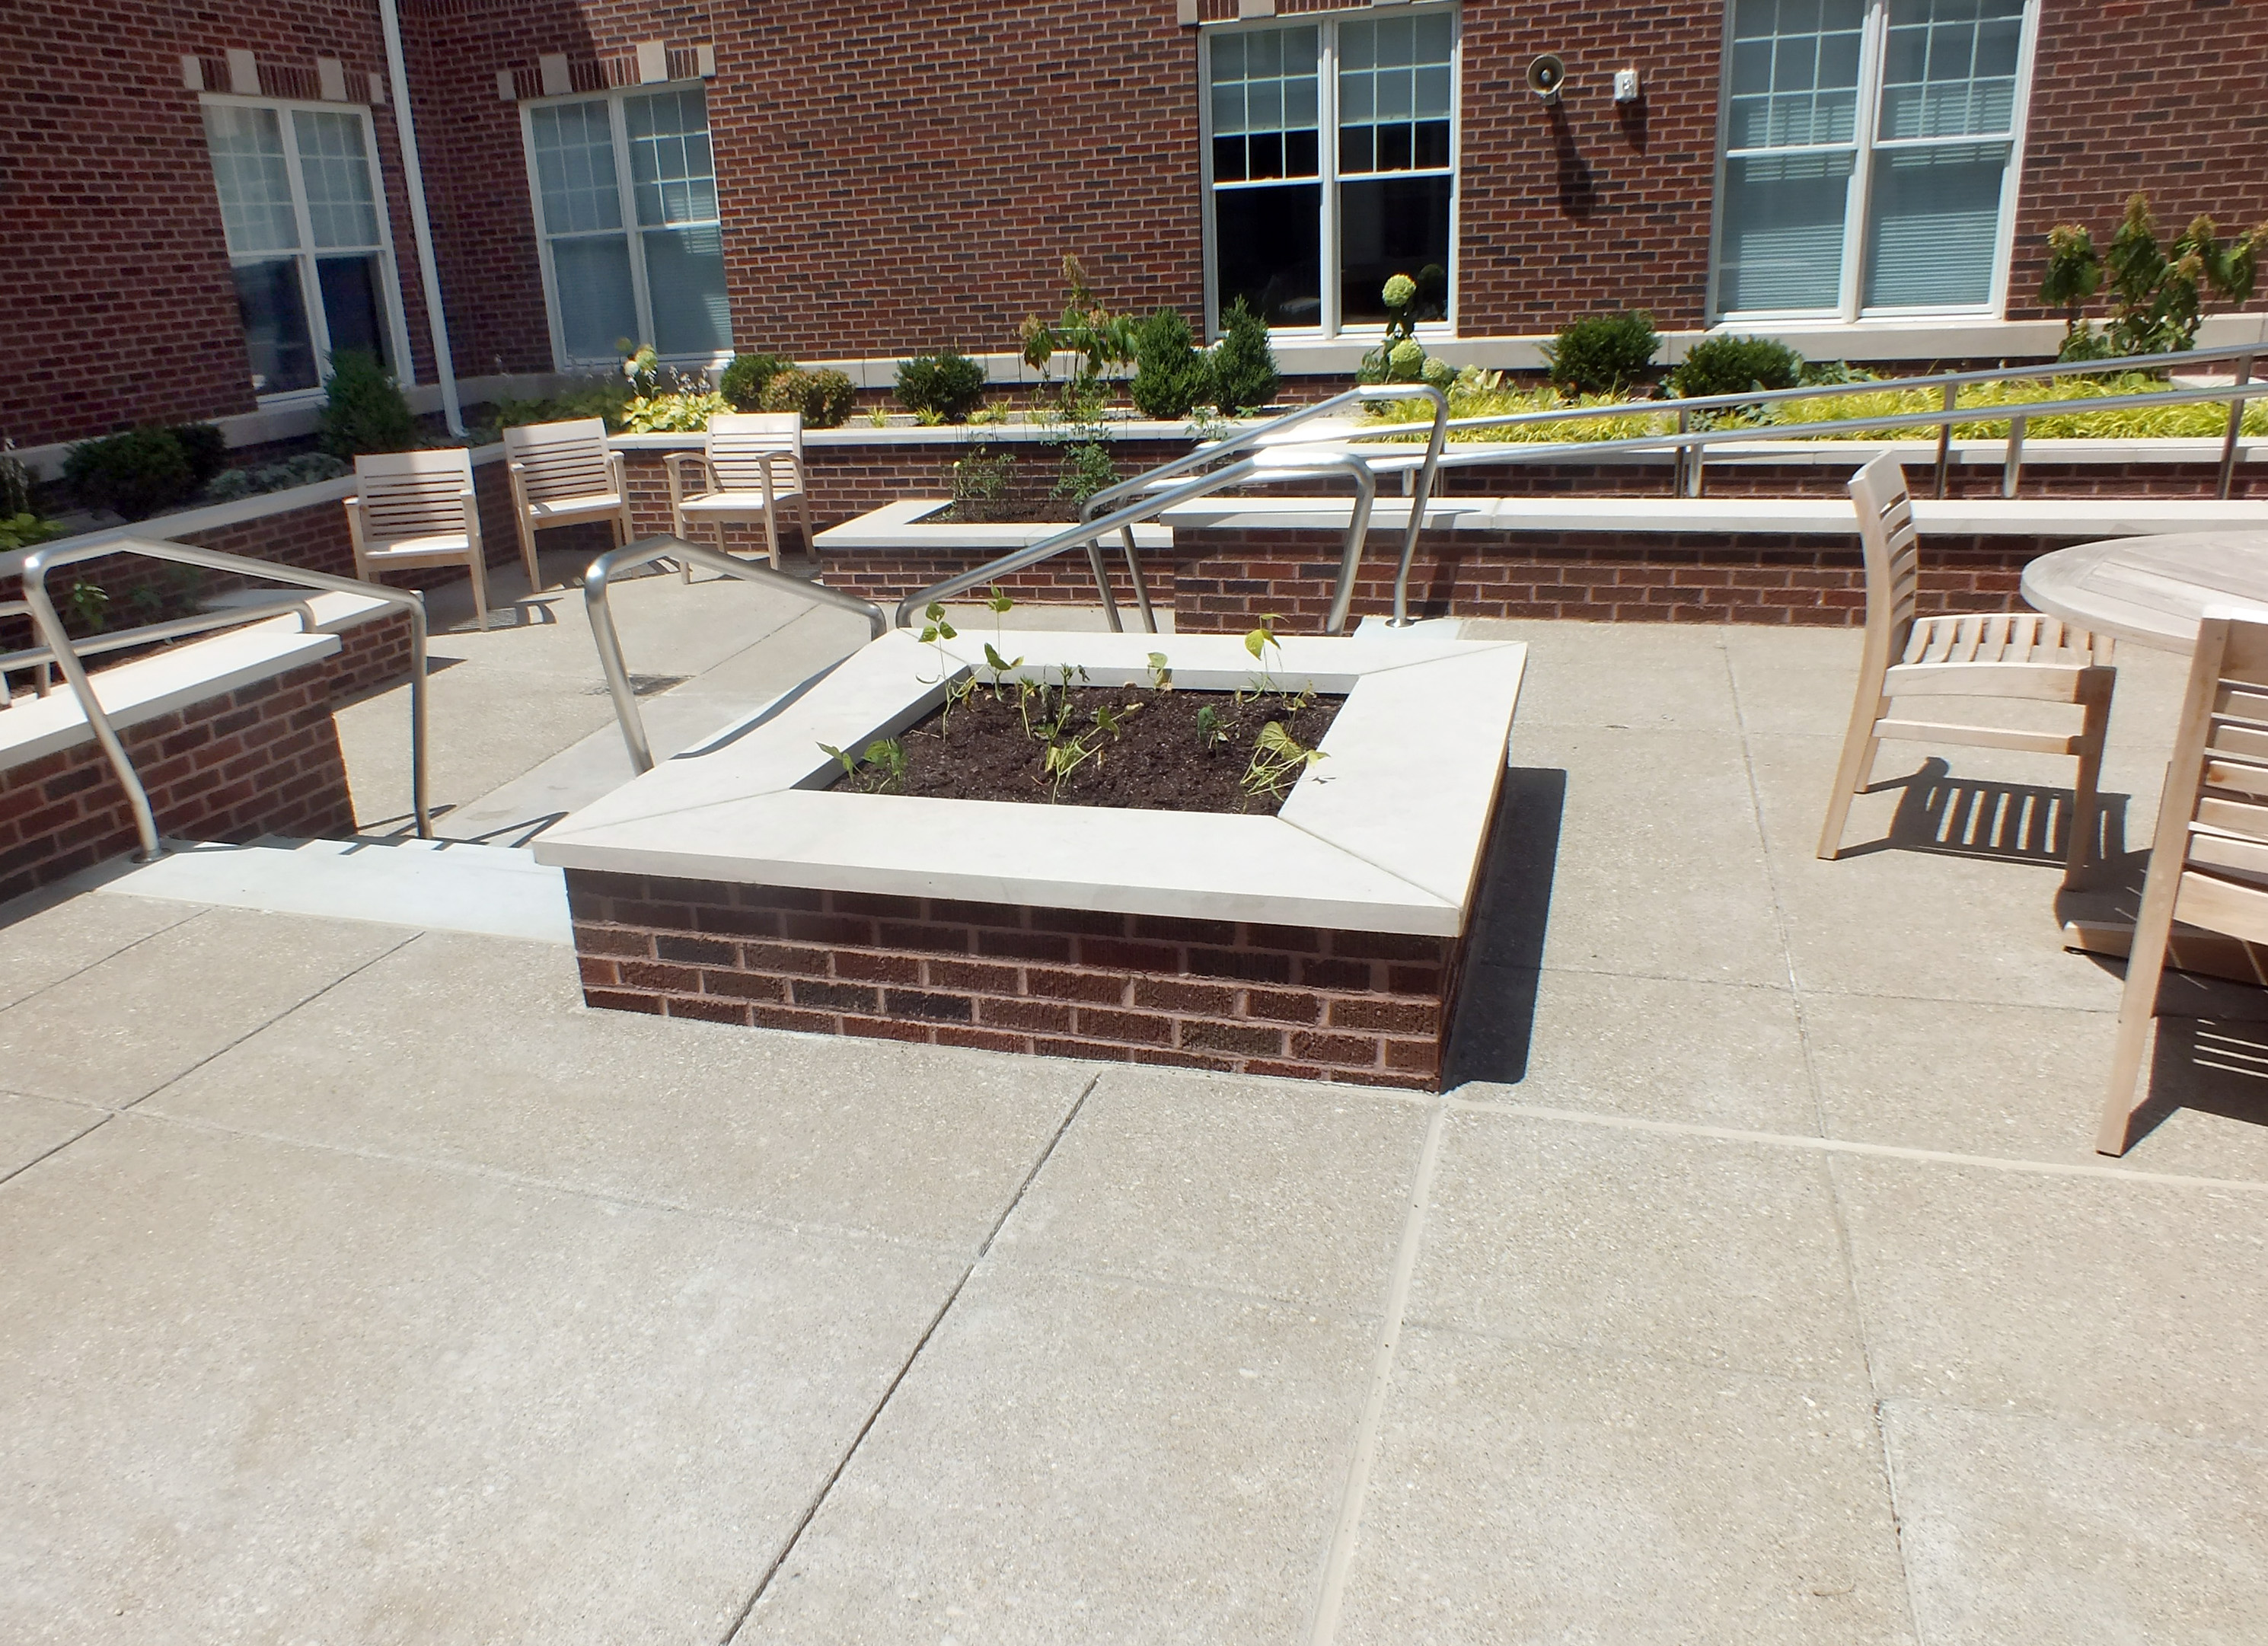 Therapeutic Garden and Courtyard